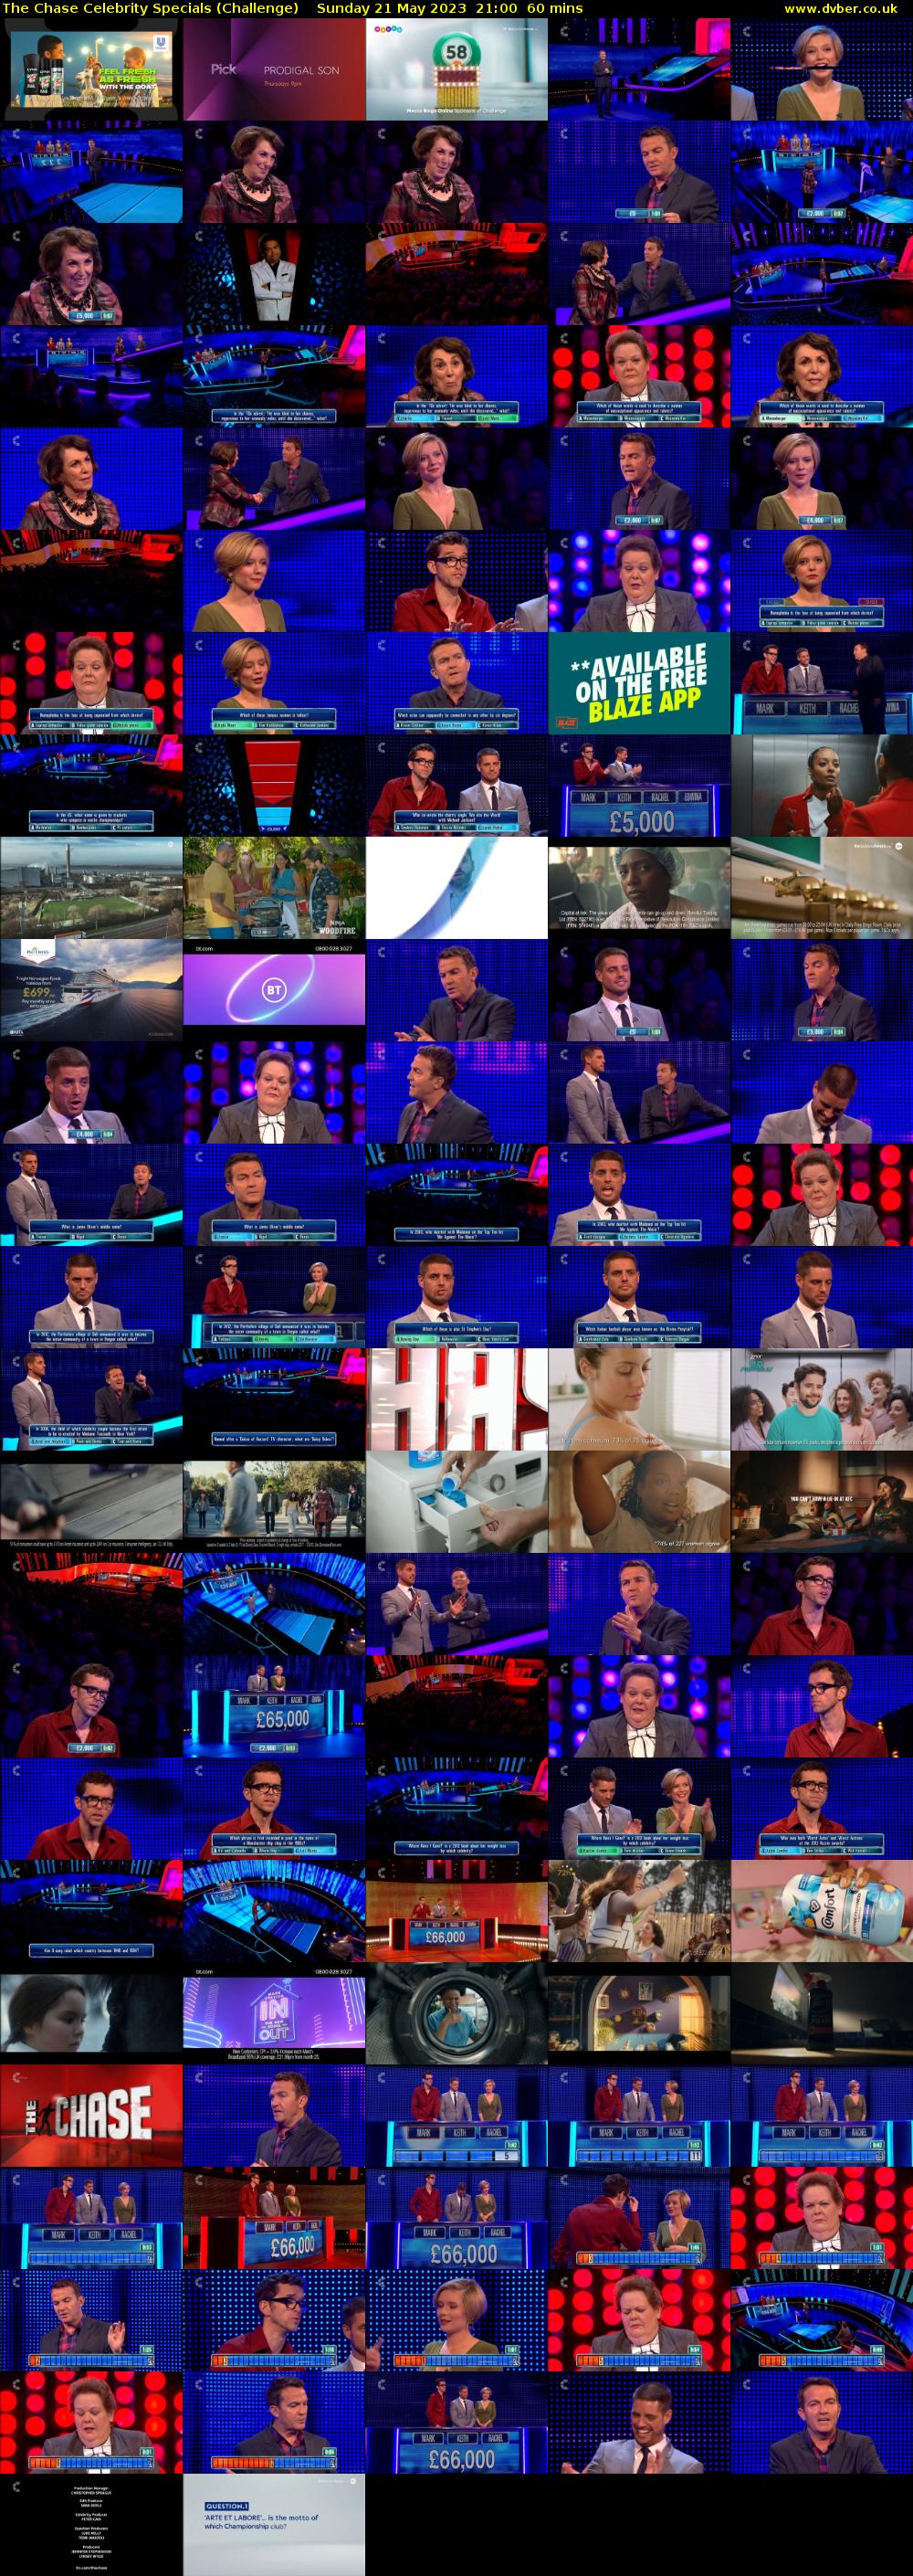 The Chase Celebrity Specials (Challenge) Sunday 21 May 2023 21:00 - 22:00